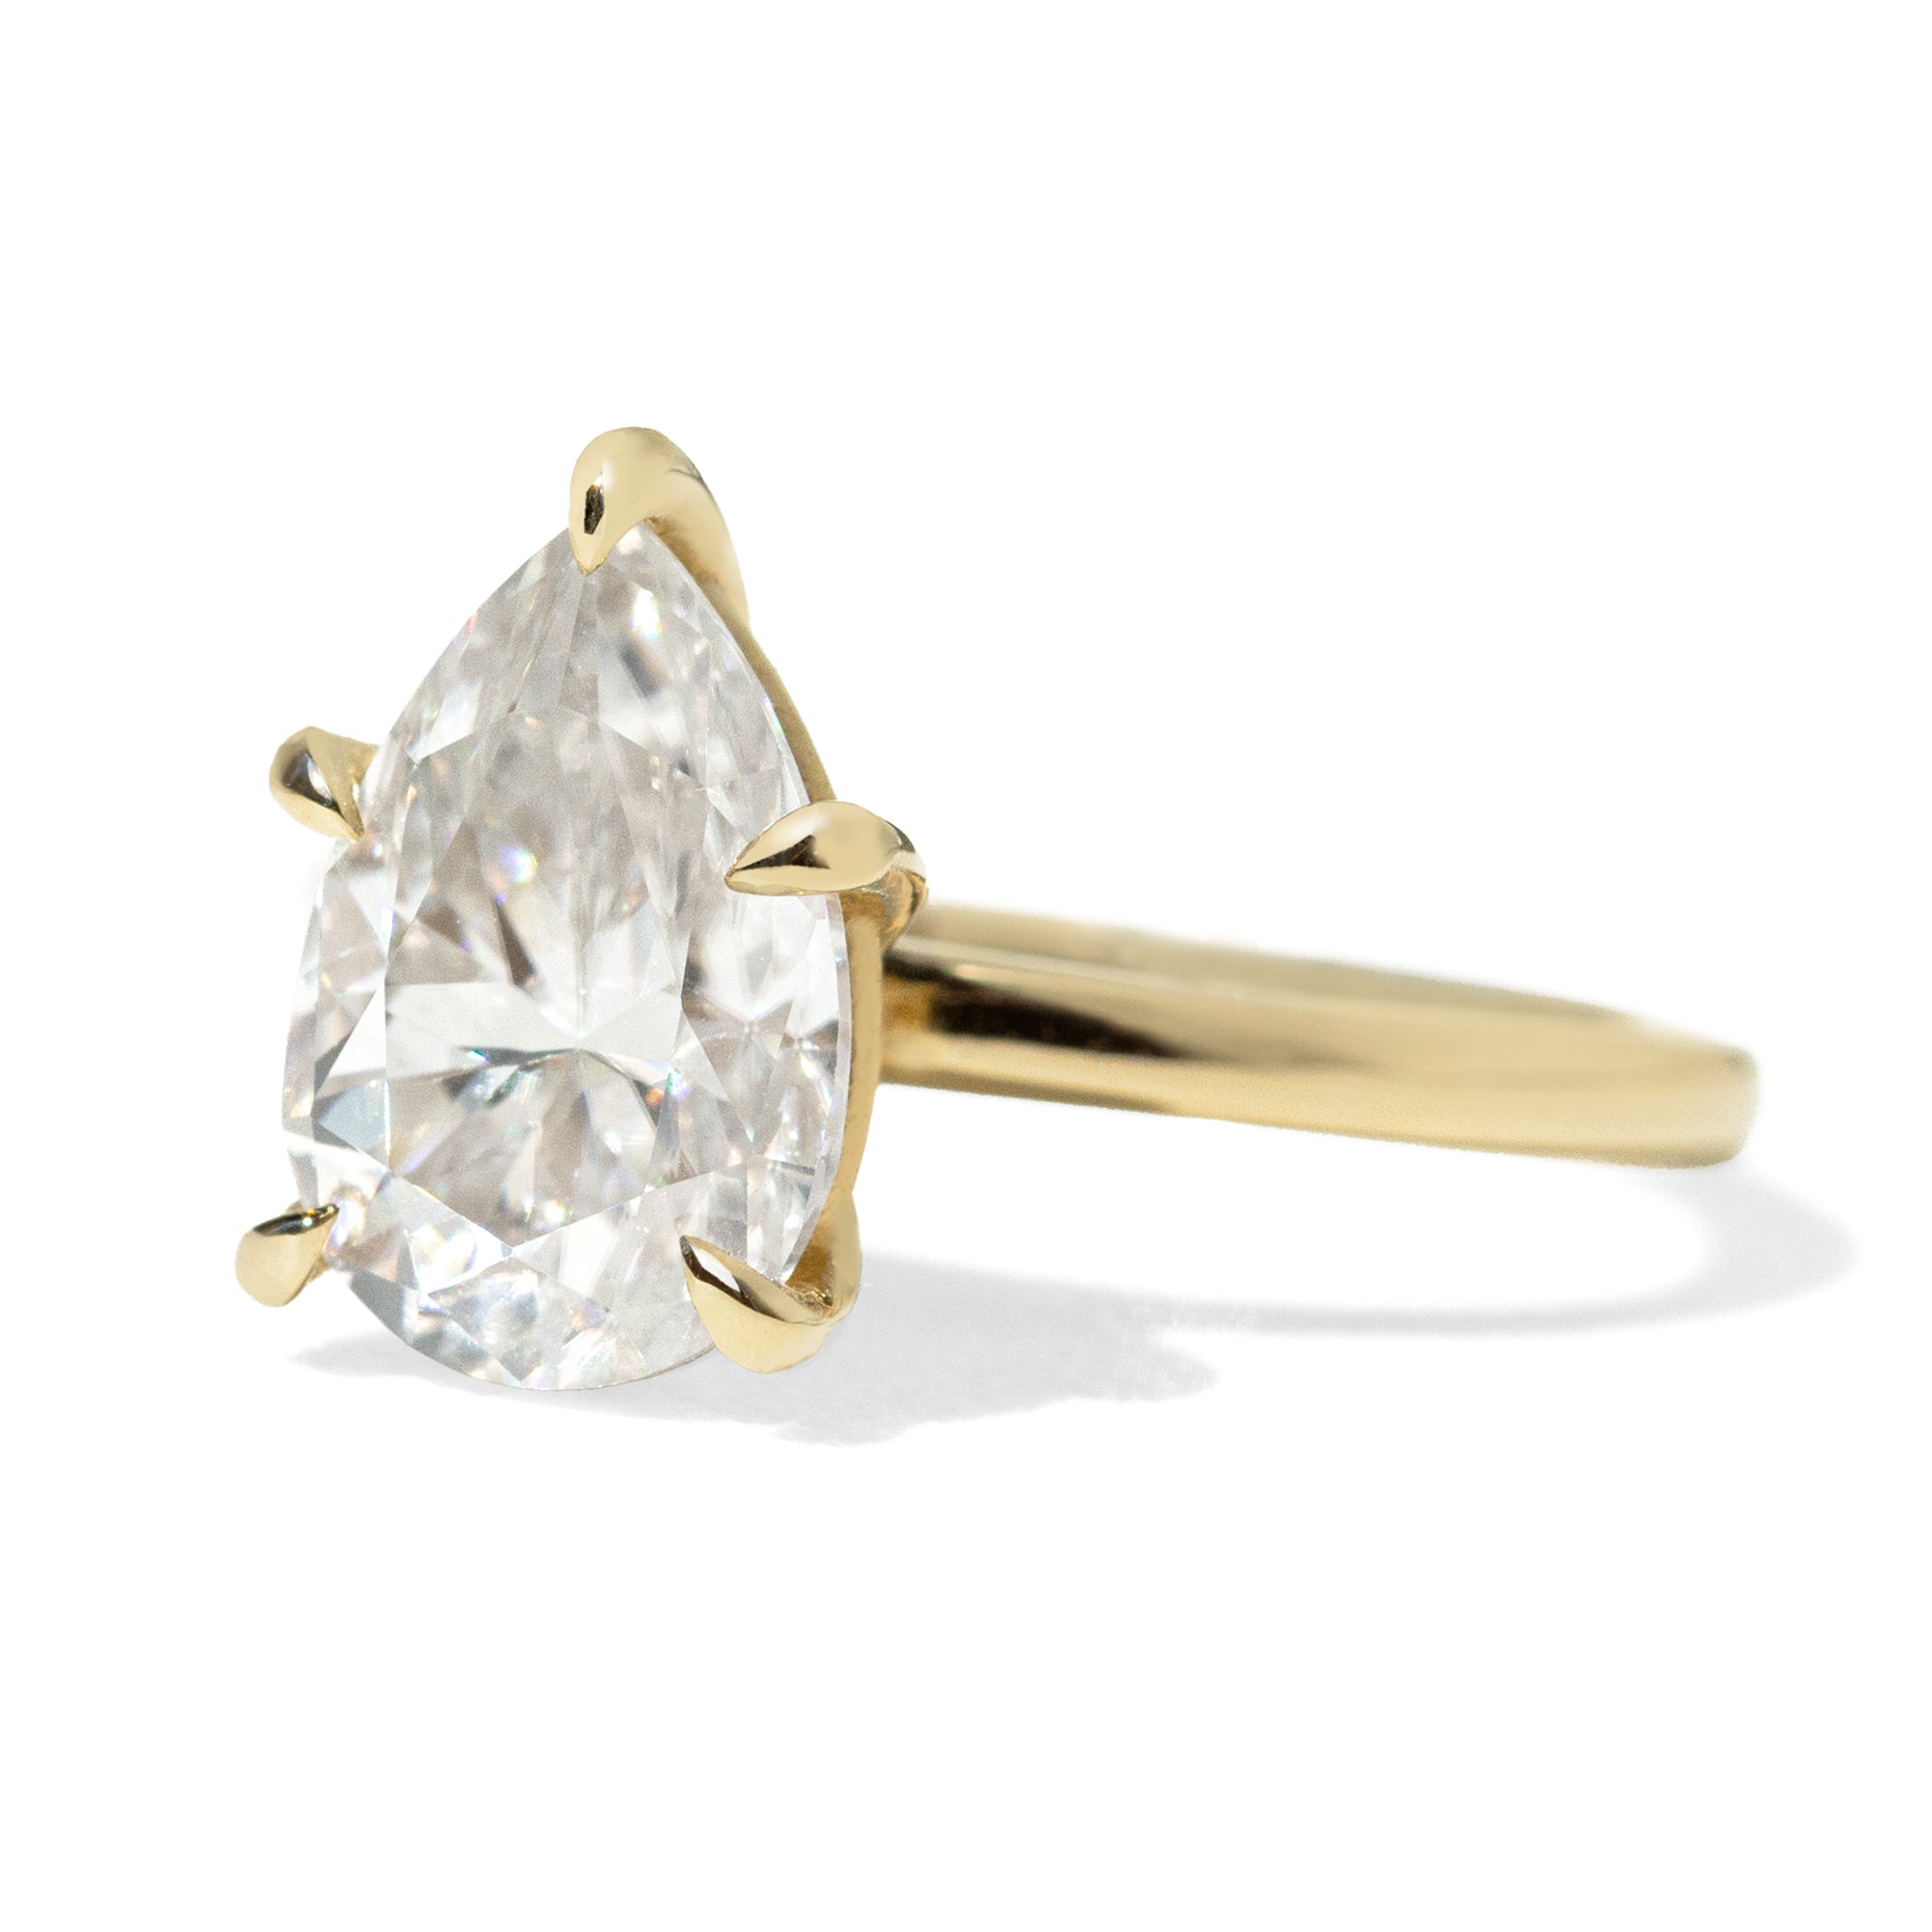 Jamie Park Jewelry | Sunshine Pear Cut Ring The Sunshine Pear Cut Solitaire Ring beautifully blends modern style with elegance. Available with lab white sapphire, moissanite, or IGI certified diamond, this ring is sure to sparkle and impress. The five-prong design ensures the center stone is securely held. The size shown is 2.5ct.